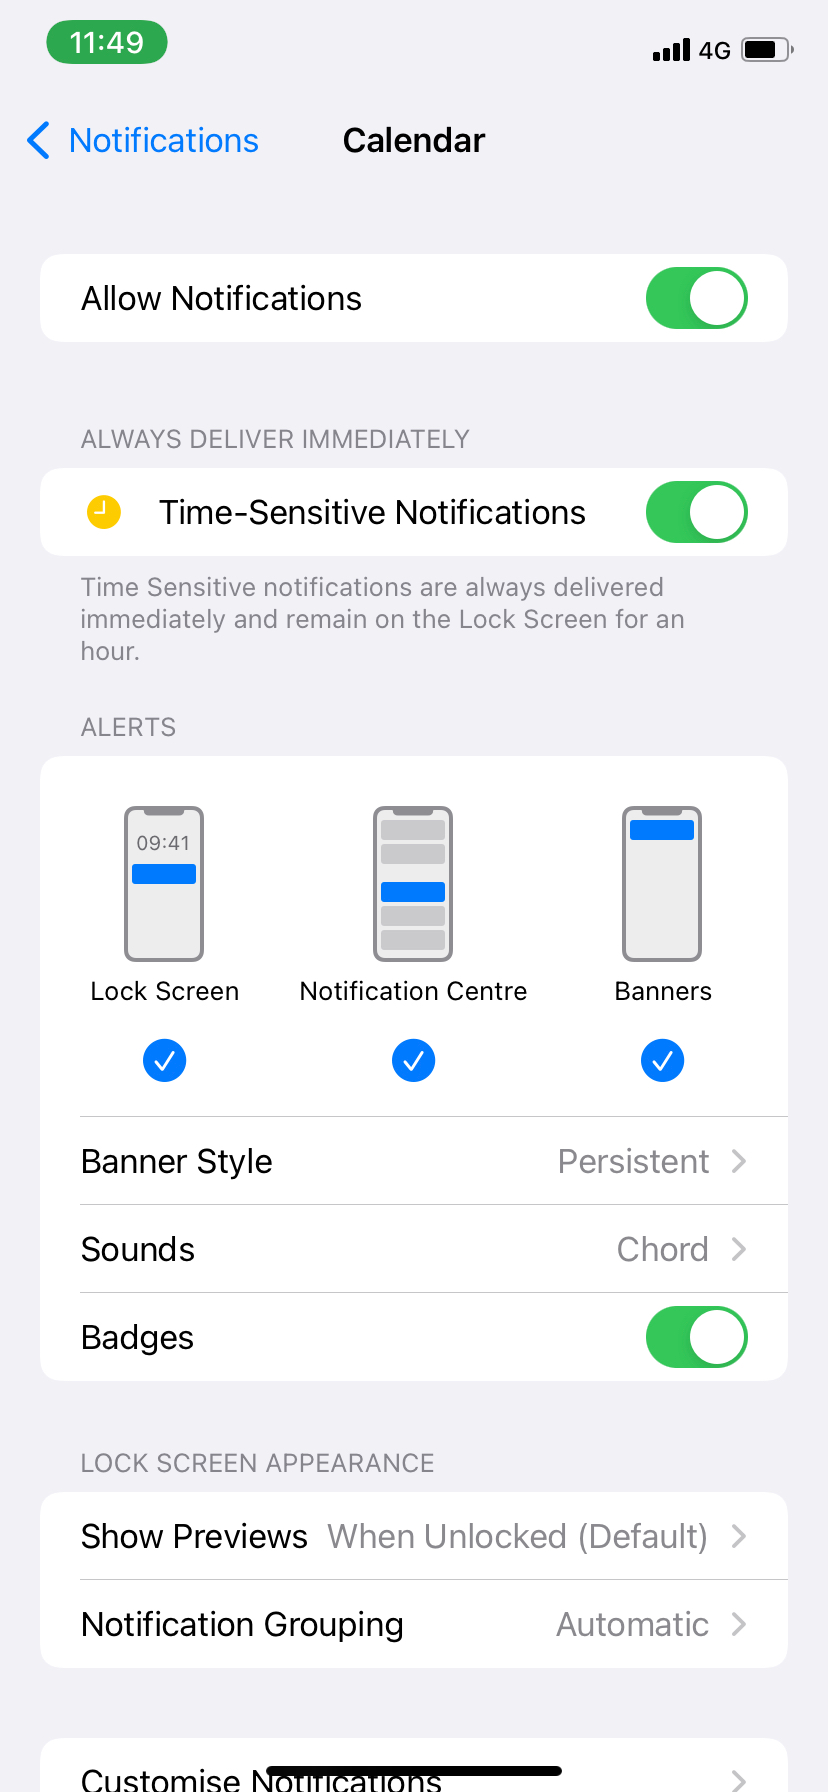 Calendar app with Time-Sensitive notifications enabled